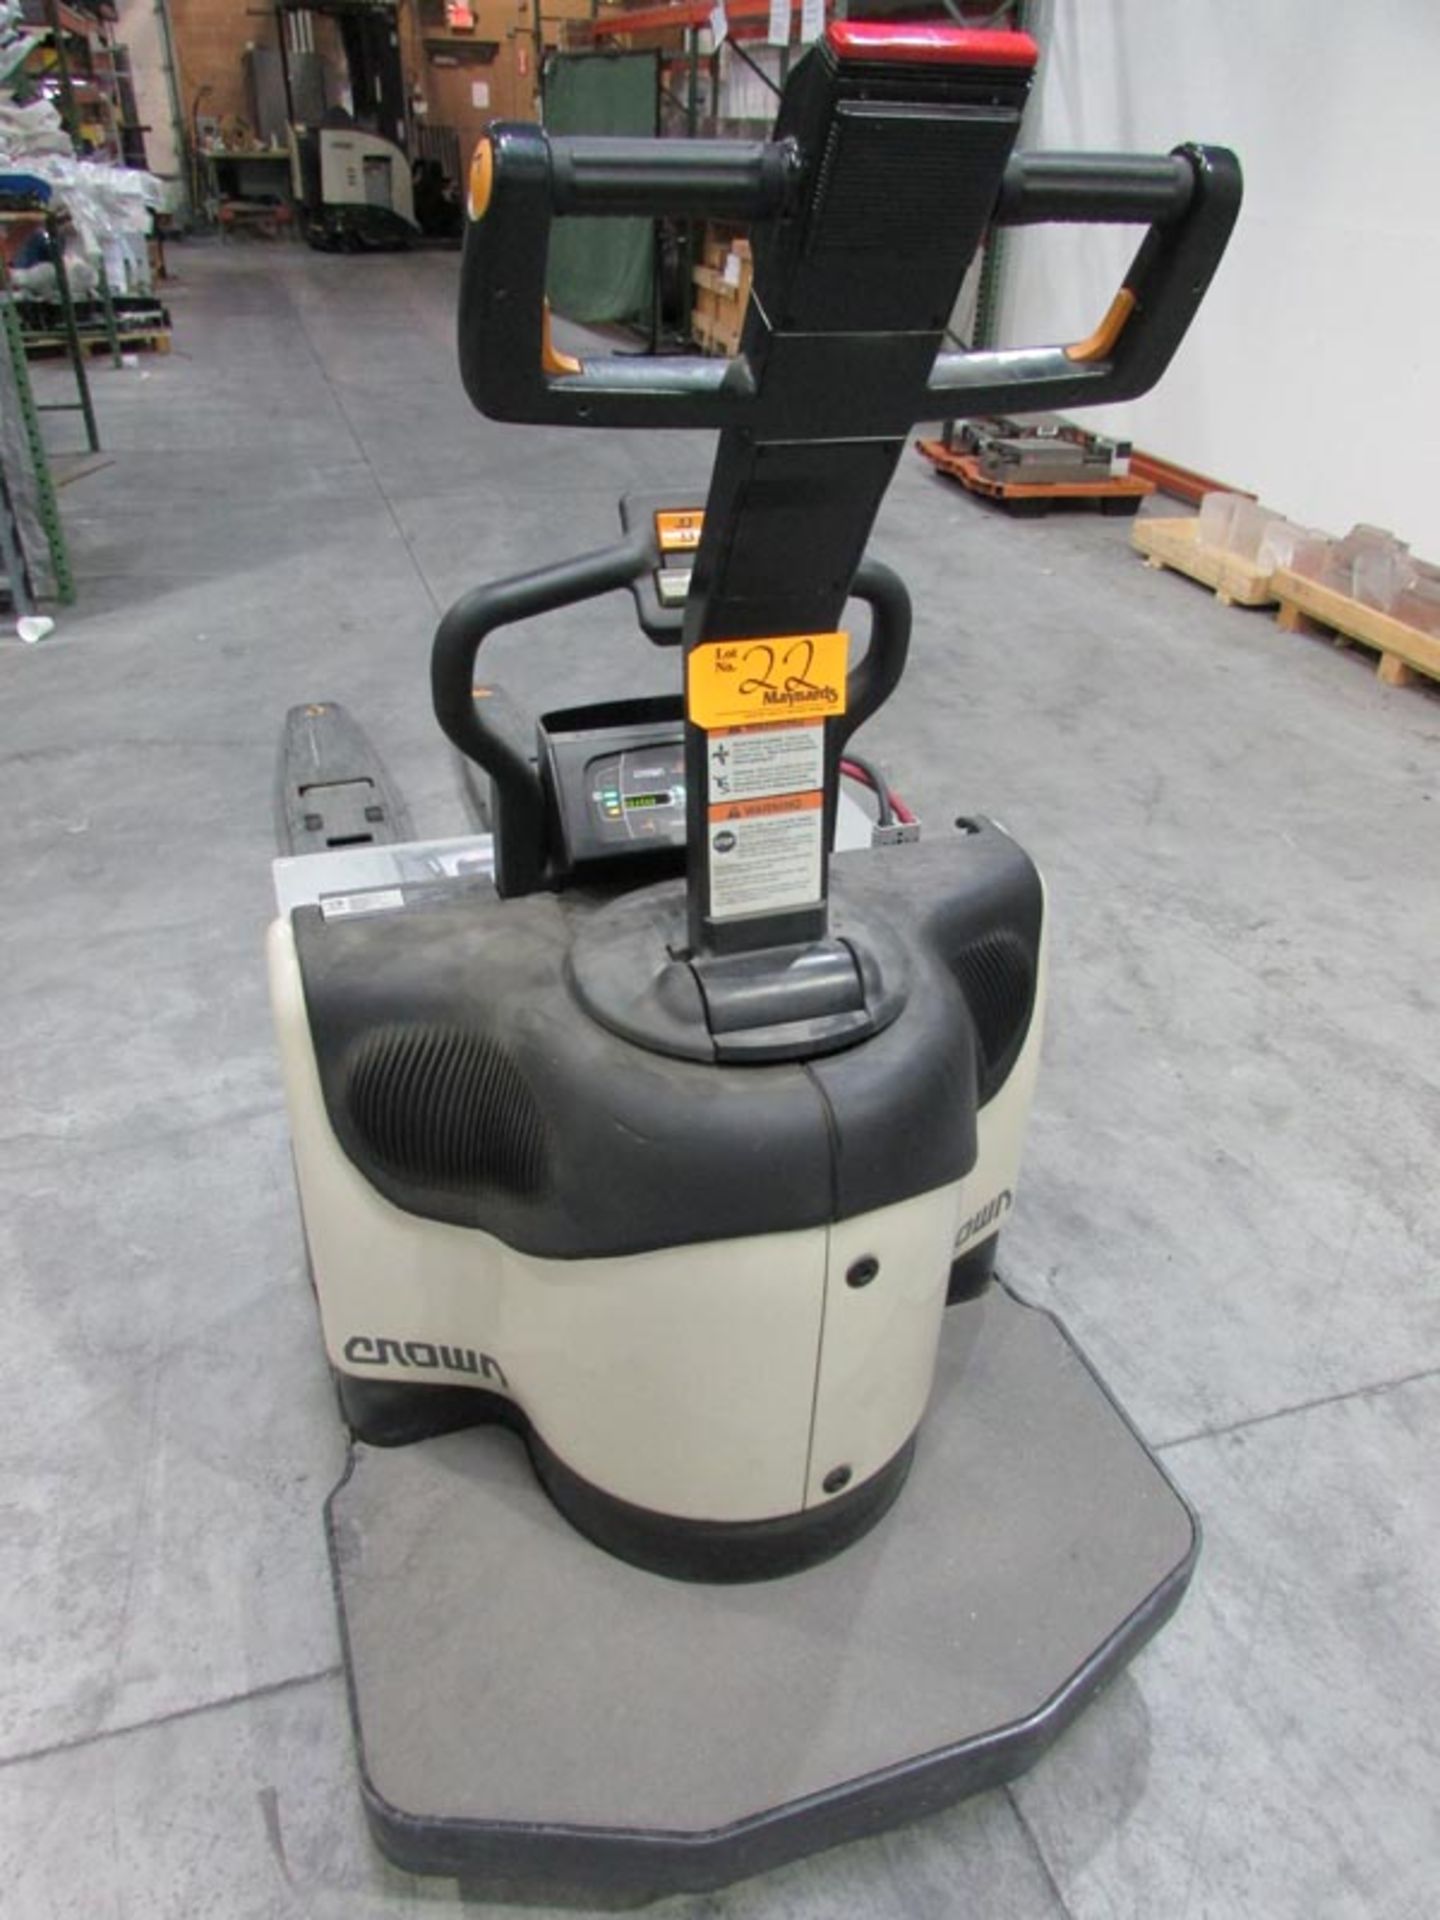 Crown Mdl: PE4500-80 24V Electric Pallet Jack 8,000Lbs Cap, 840Lbs Truck Weight, 1520Lbs Truck - Image 5 of 5